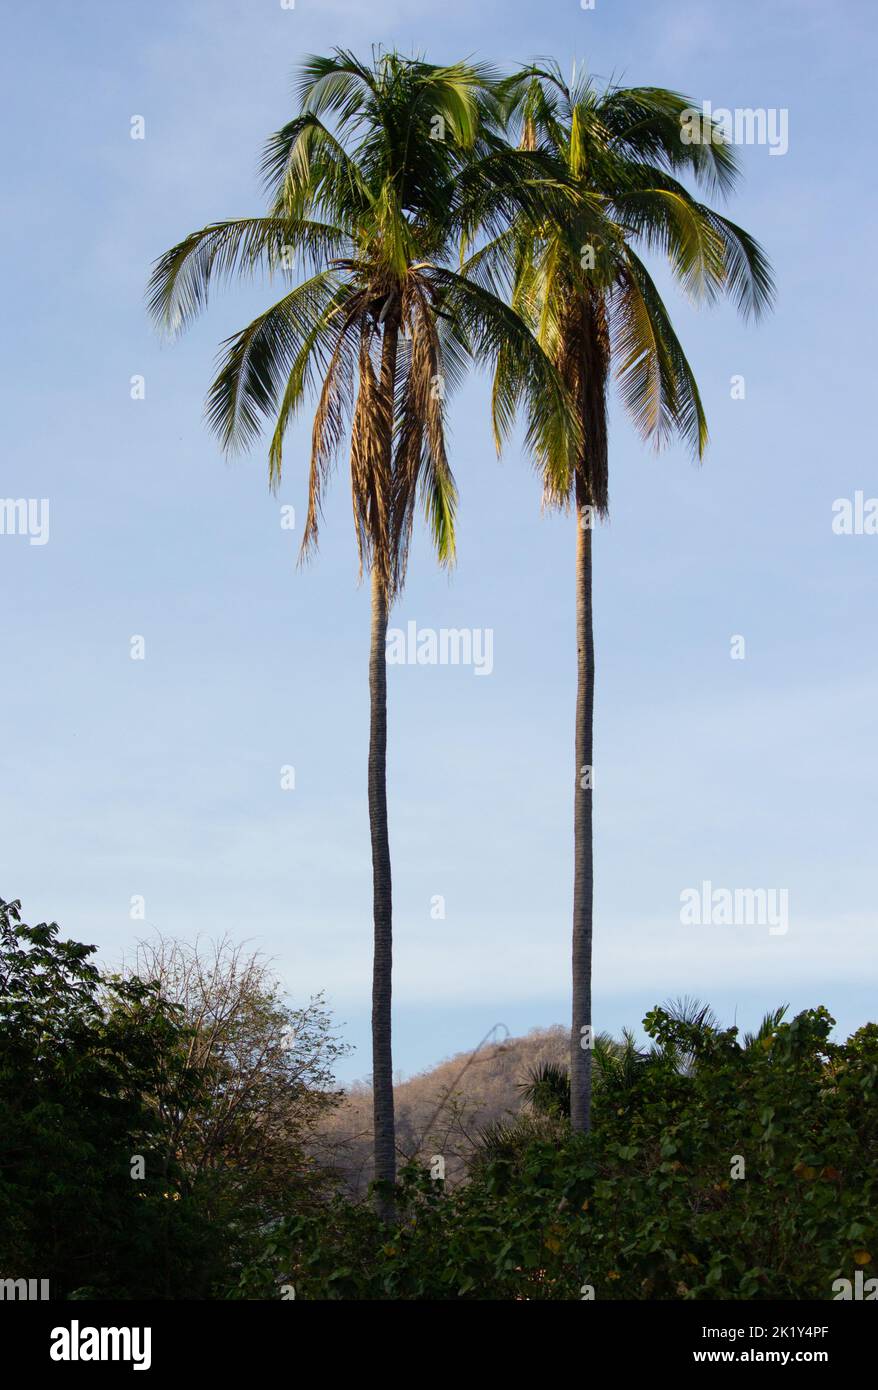 Two palm trees stand tall along the beach with a background of ocean and hills. A postcard view of palm trees. Stock Photo